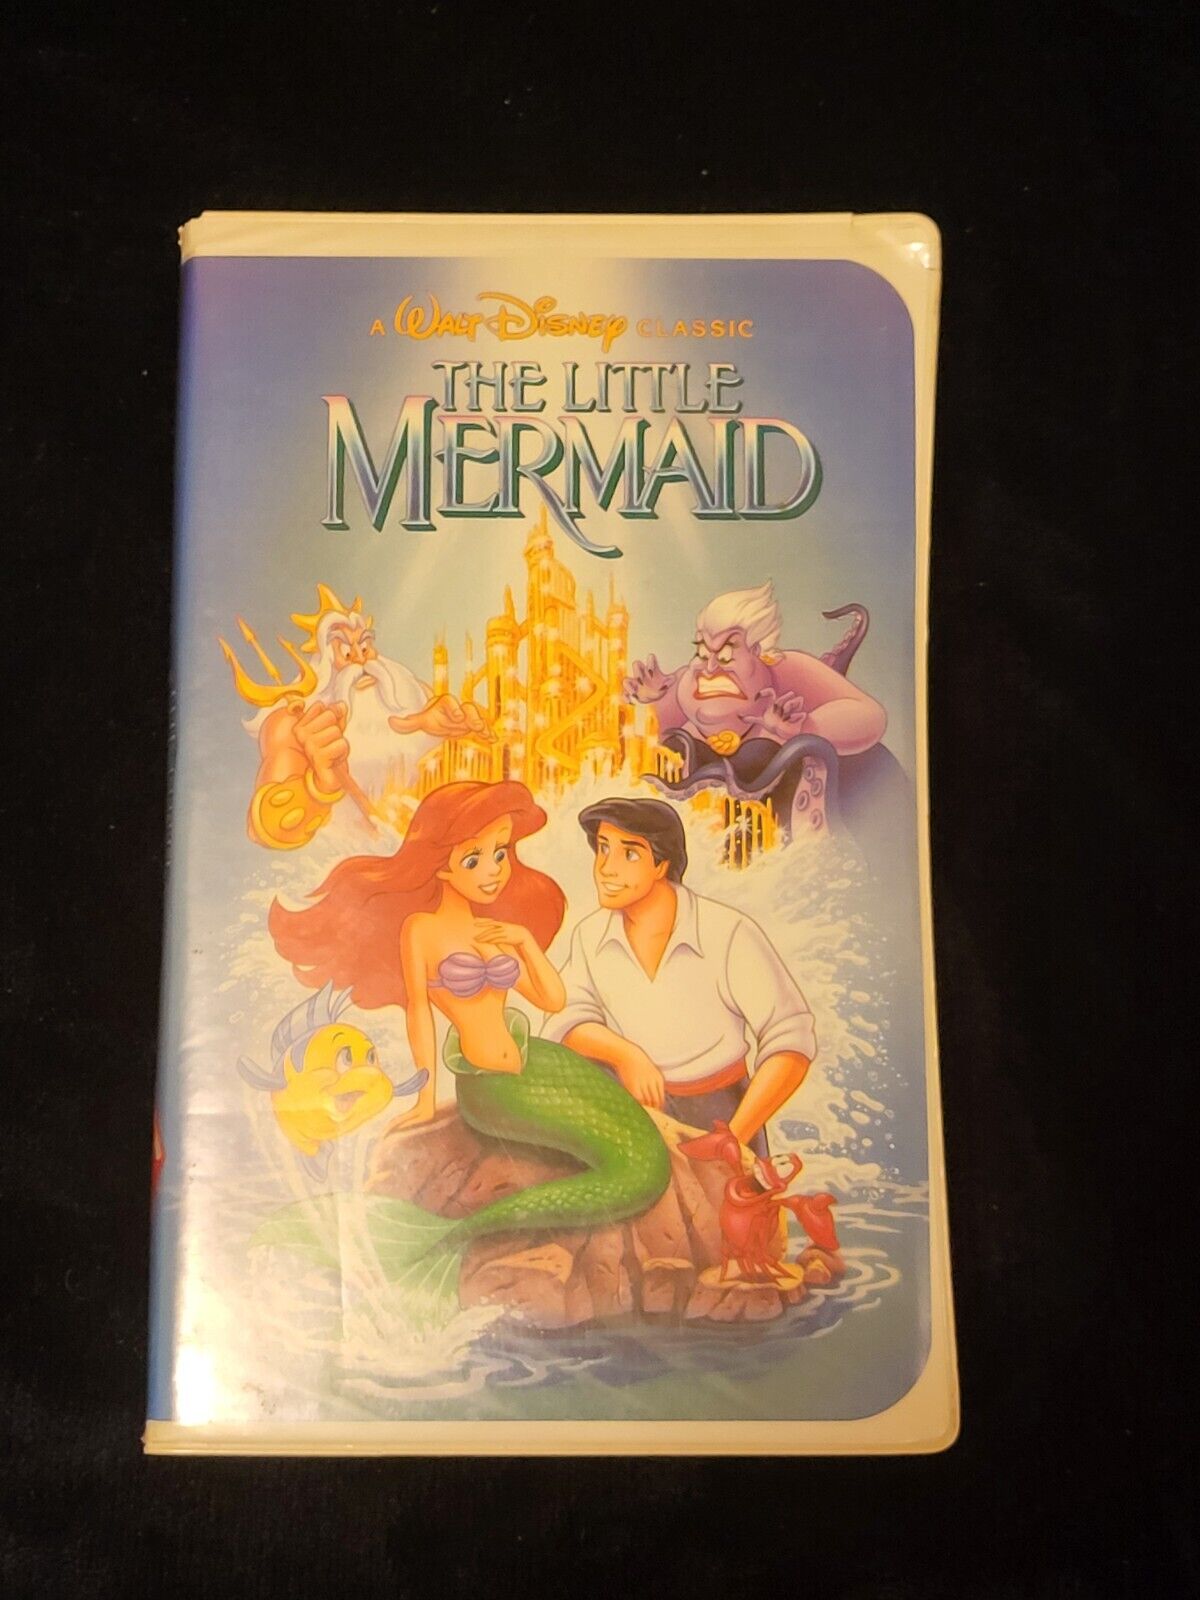 LITTLE MERMAID BLACK DIAMOND VHS  with BANNED ORIGINAL COVER